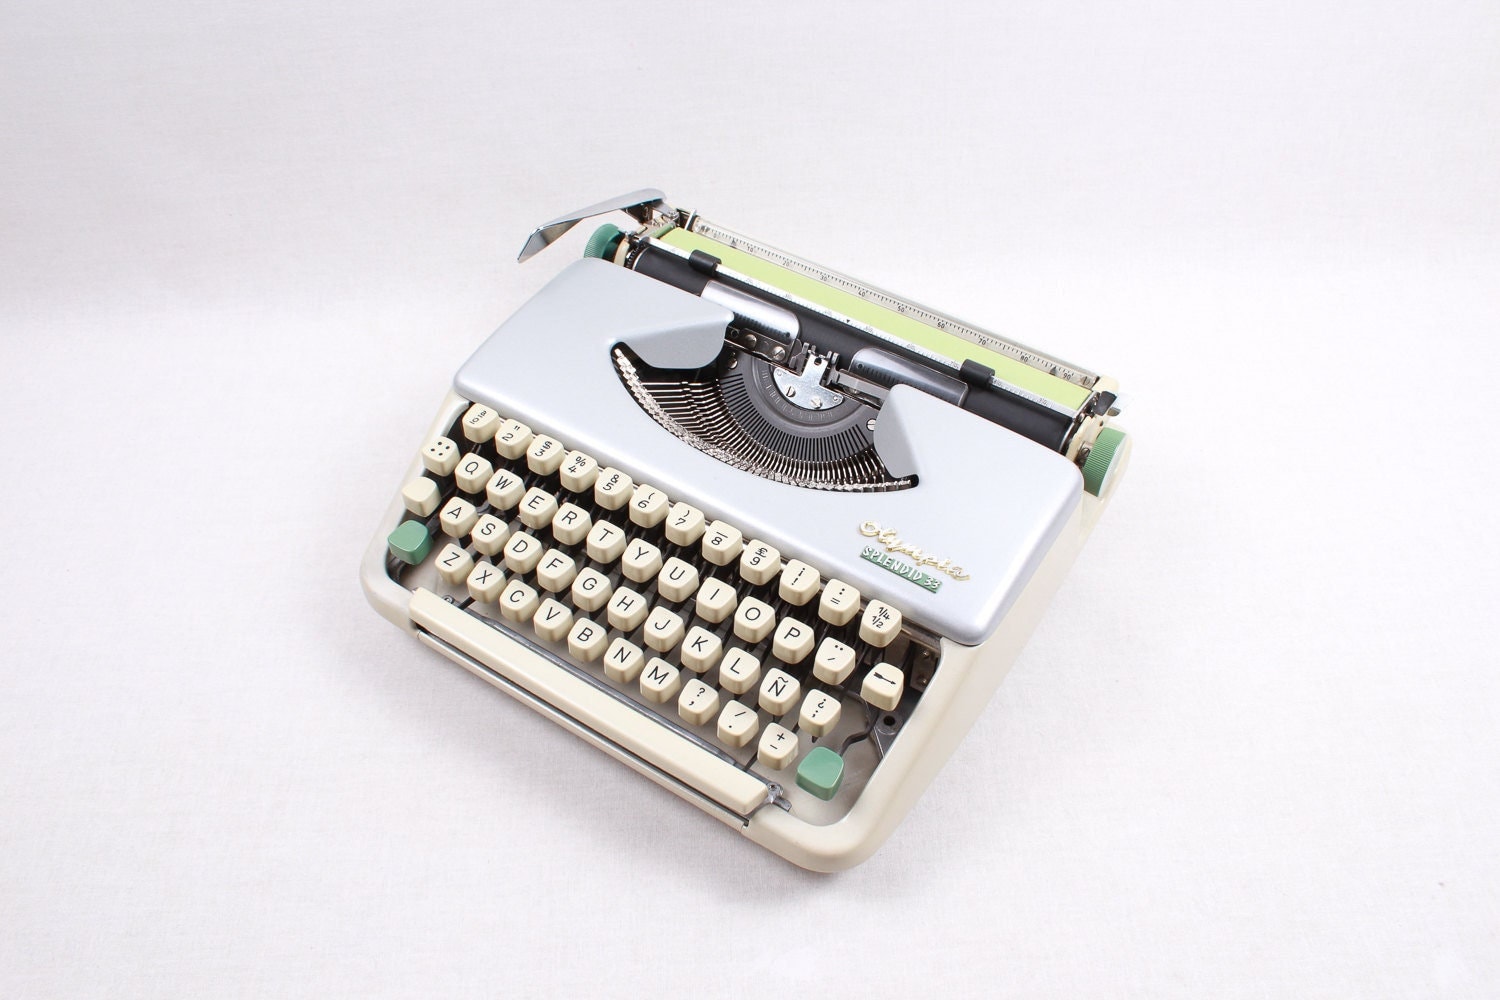 SALE! - Olympia Splendid 33 Cream & Silver Typewriter, Vintage, Mint Condition, Professionally Serviced